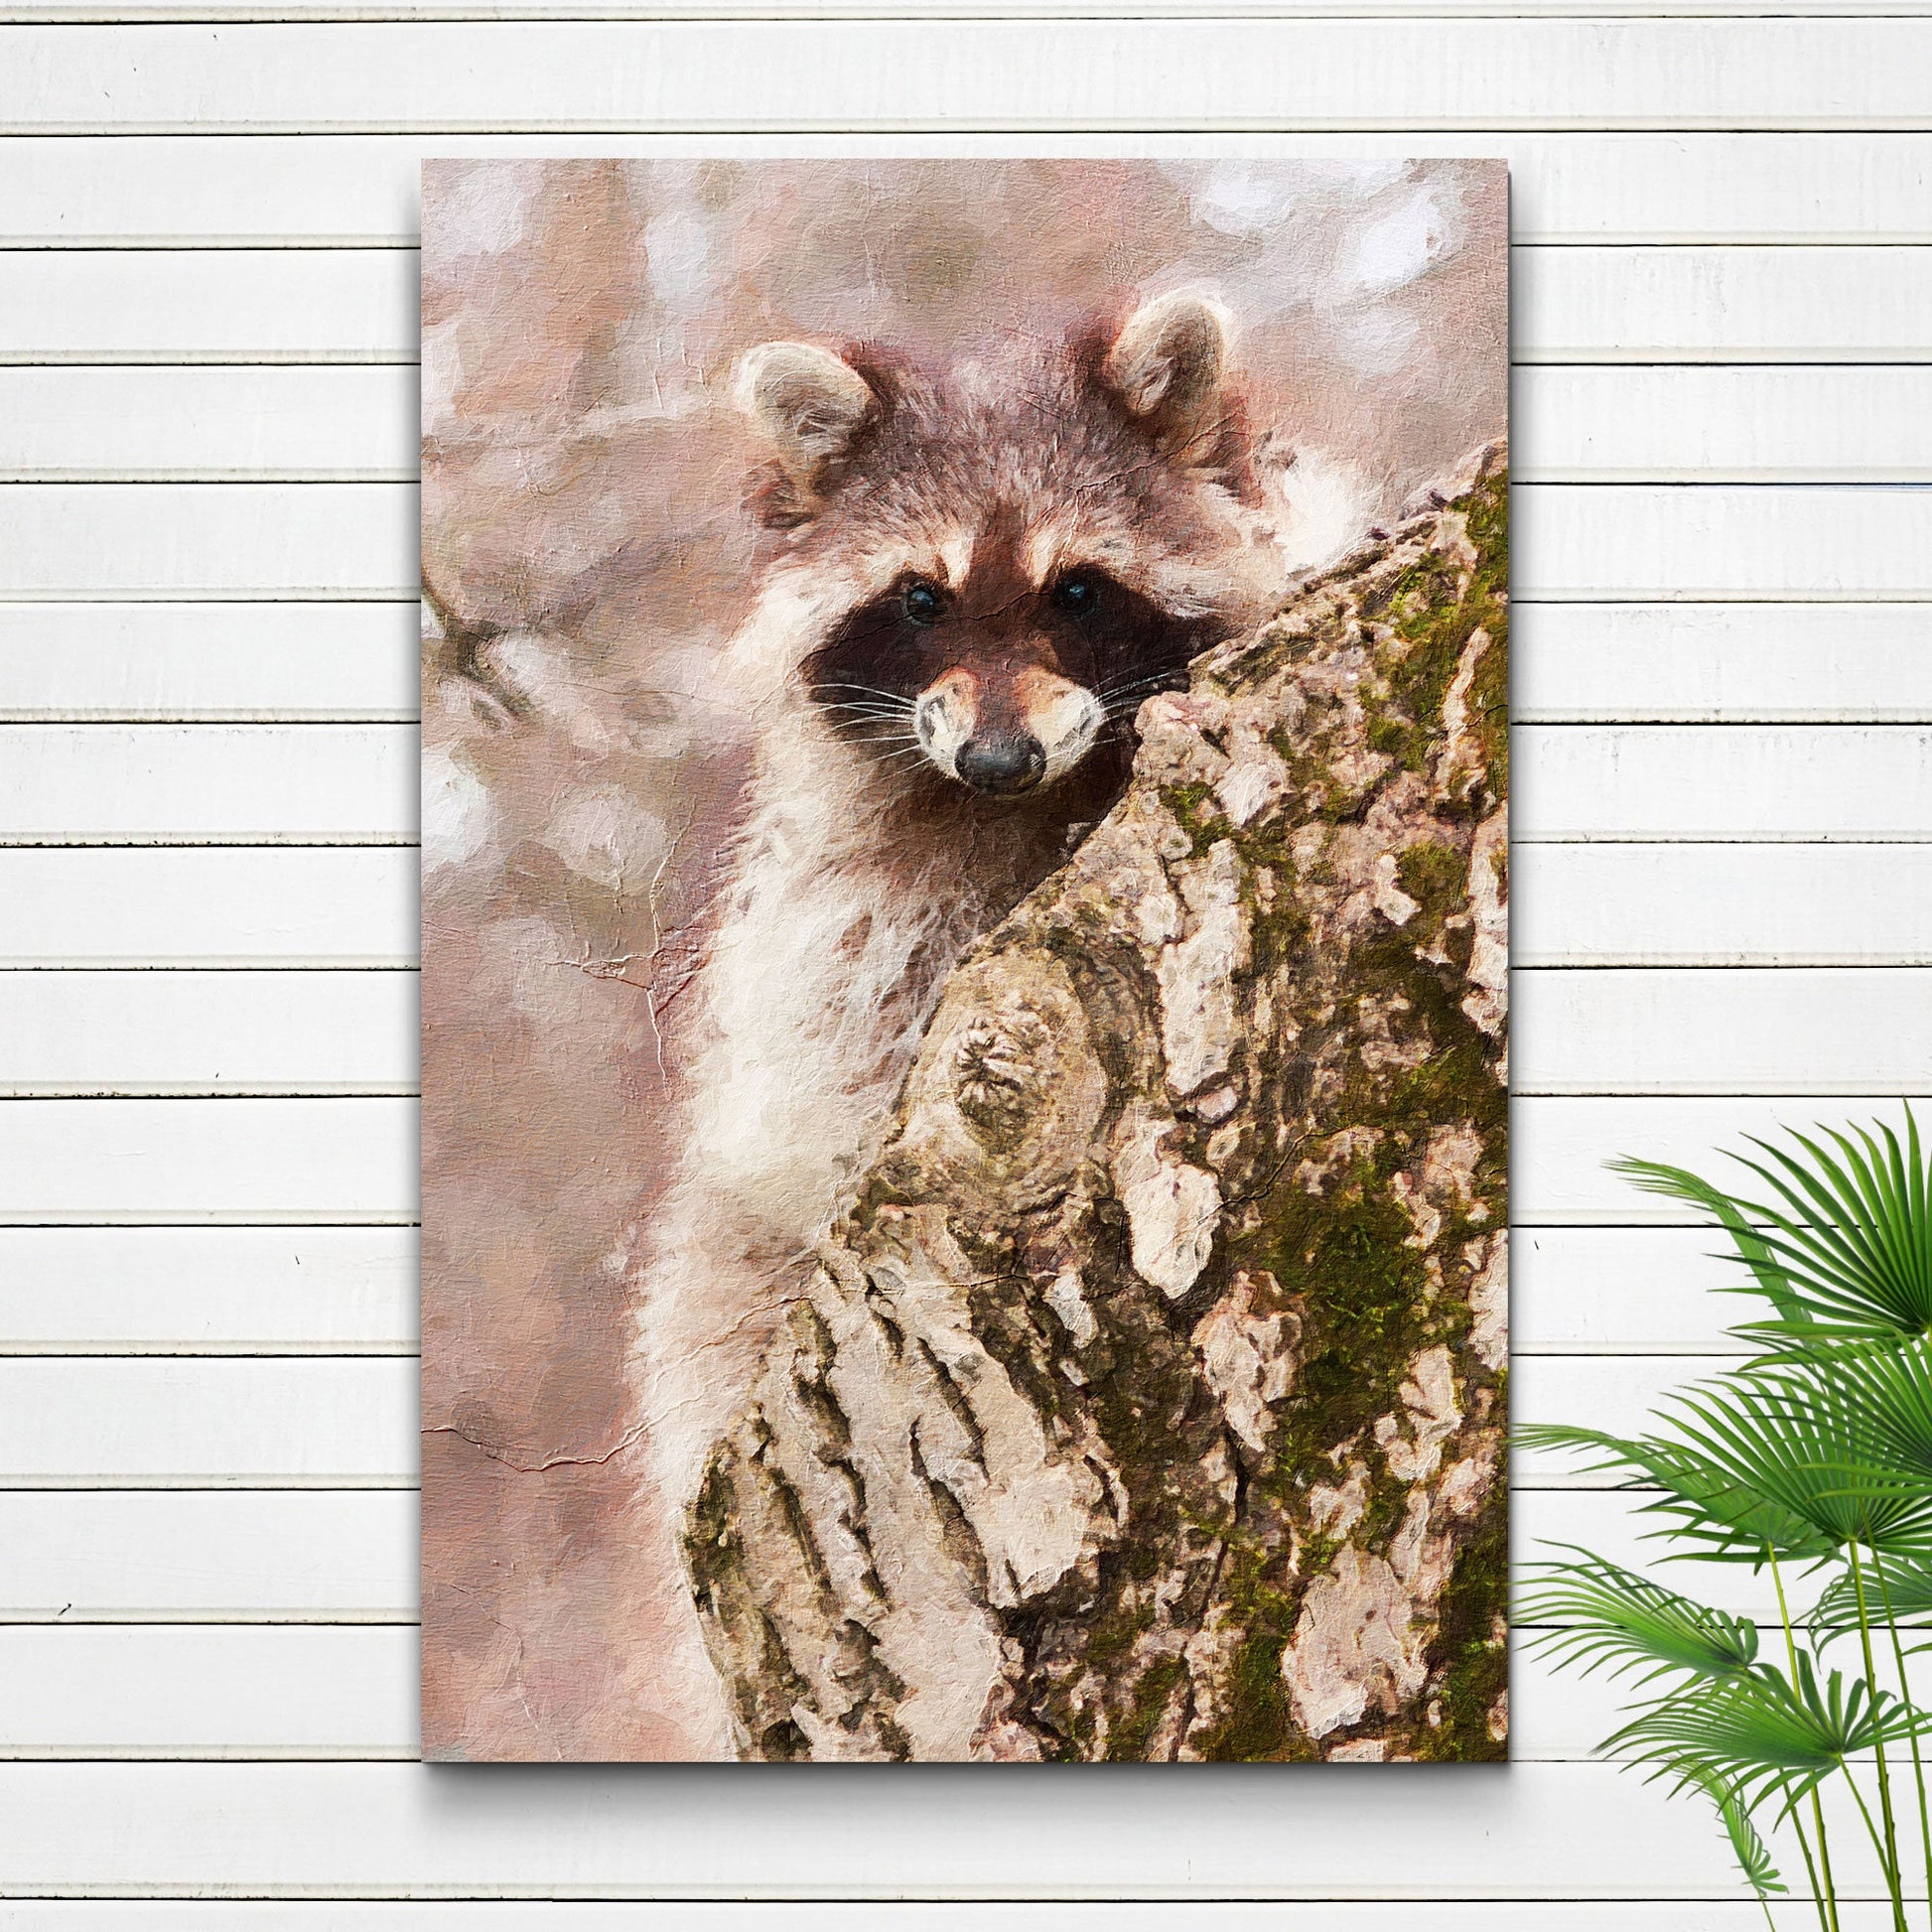 Secret Admirer Raccoon  Canvas Wall Art with a Mysterious Touch